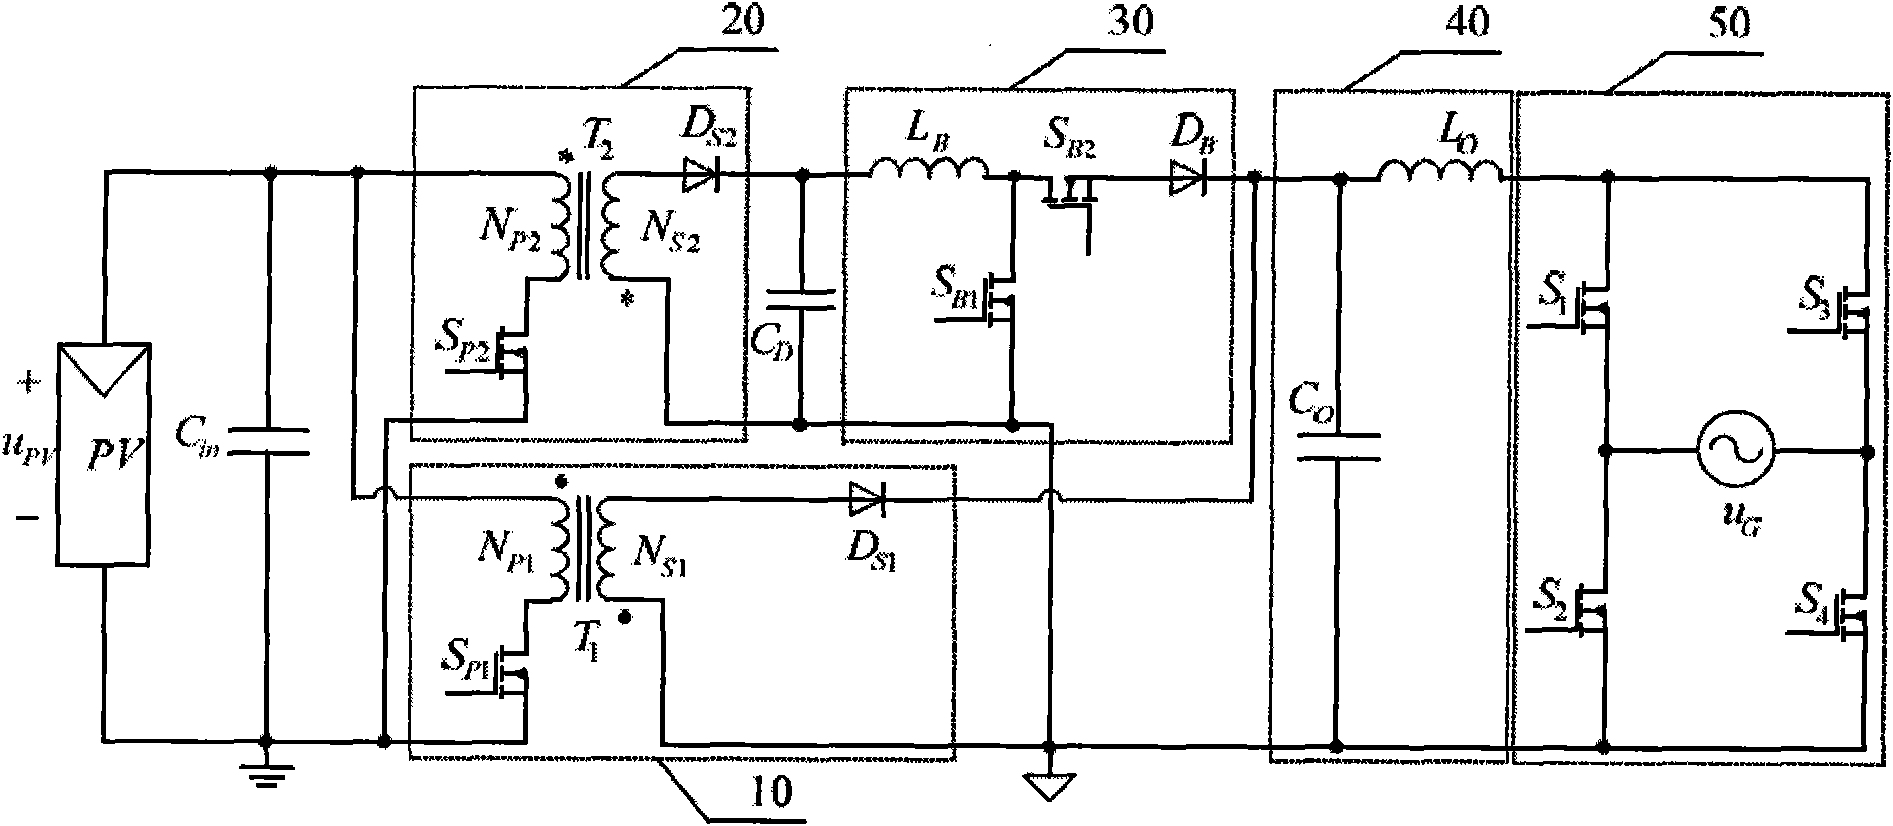 Photovoltaic grid-connected inverter for active energy decoupling